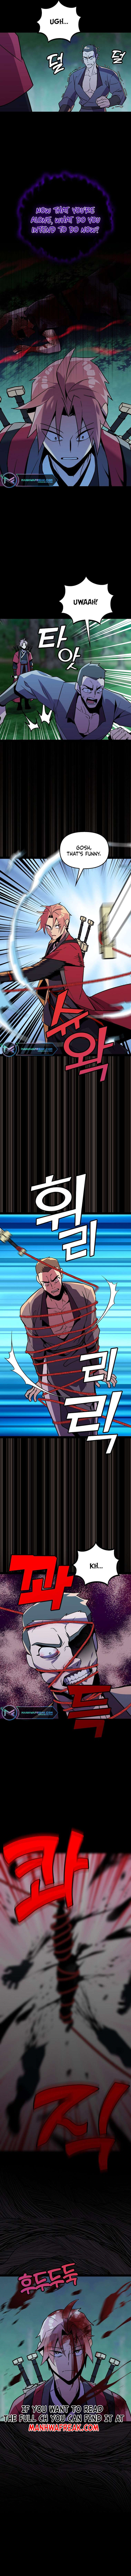 Absolute Martial Arts Chapter 99 - Page 3